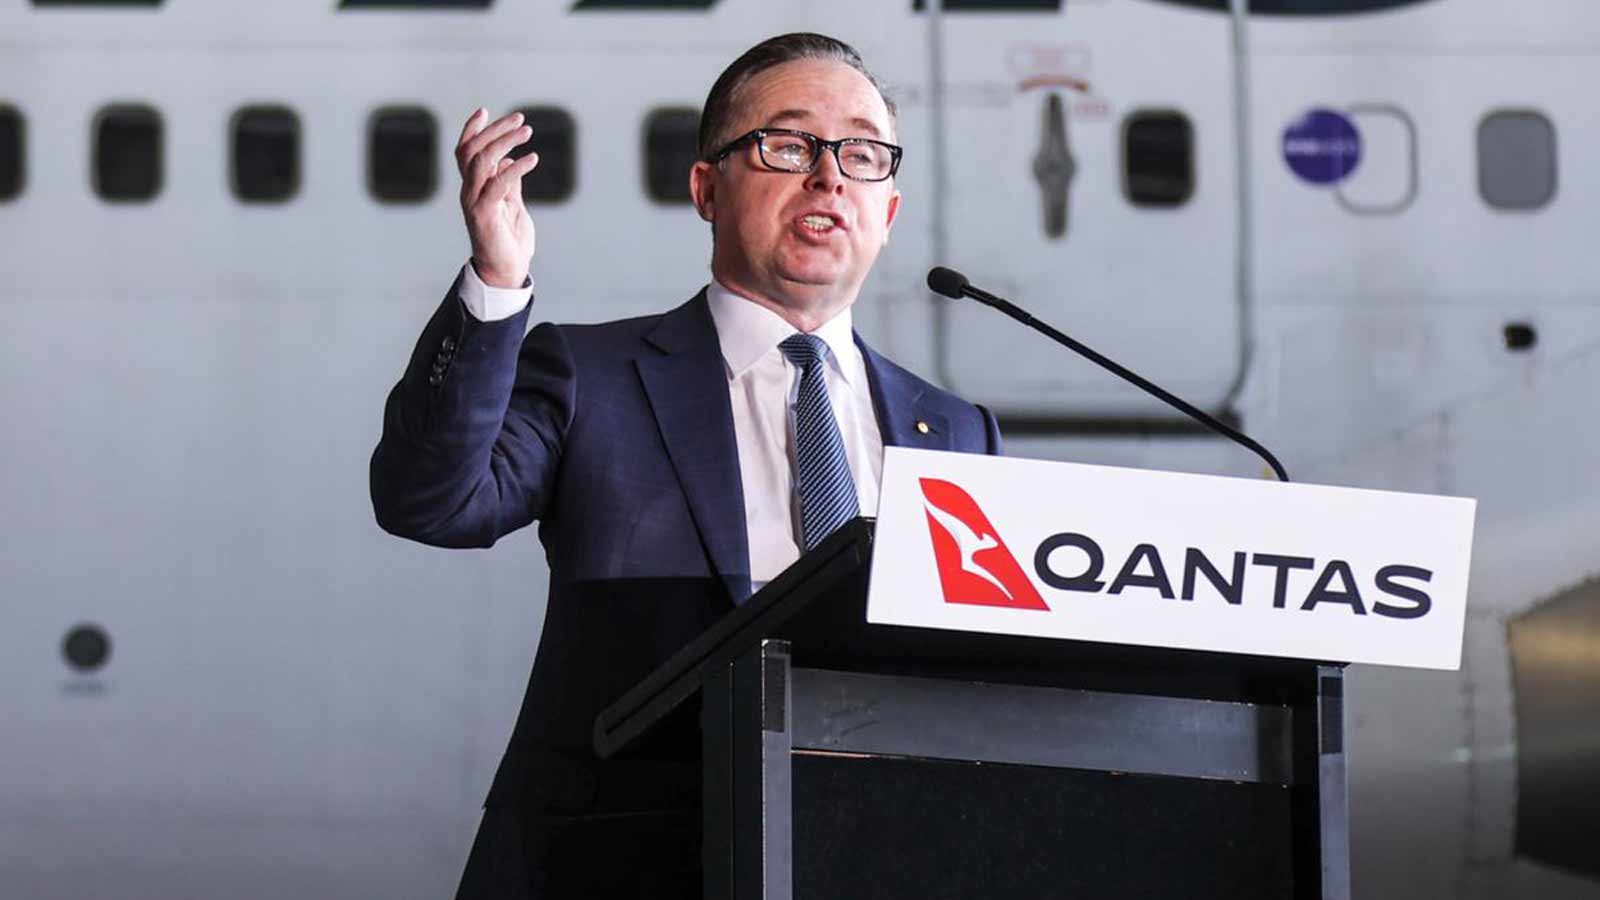 Qantas Launches ‘Apology Package’ To Make Up For Recent Operational Challenges